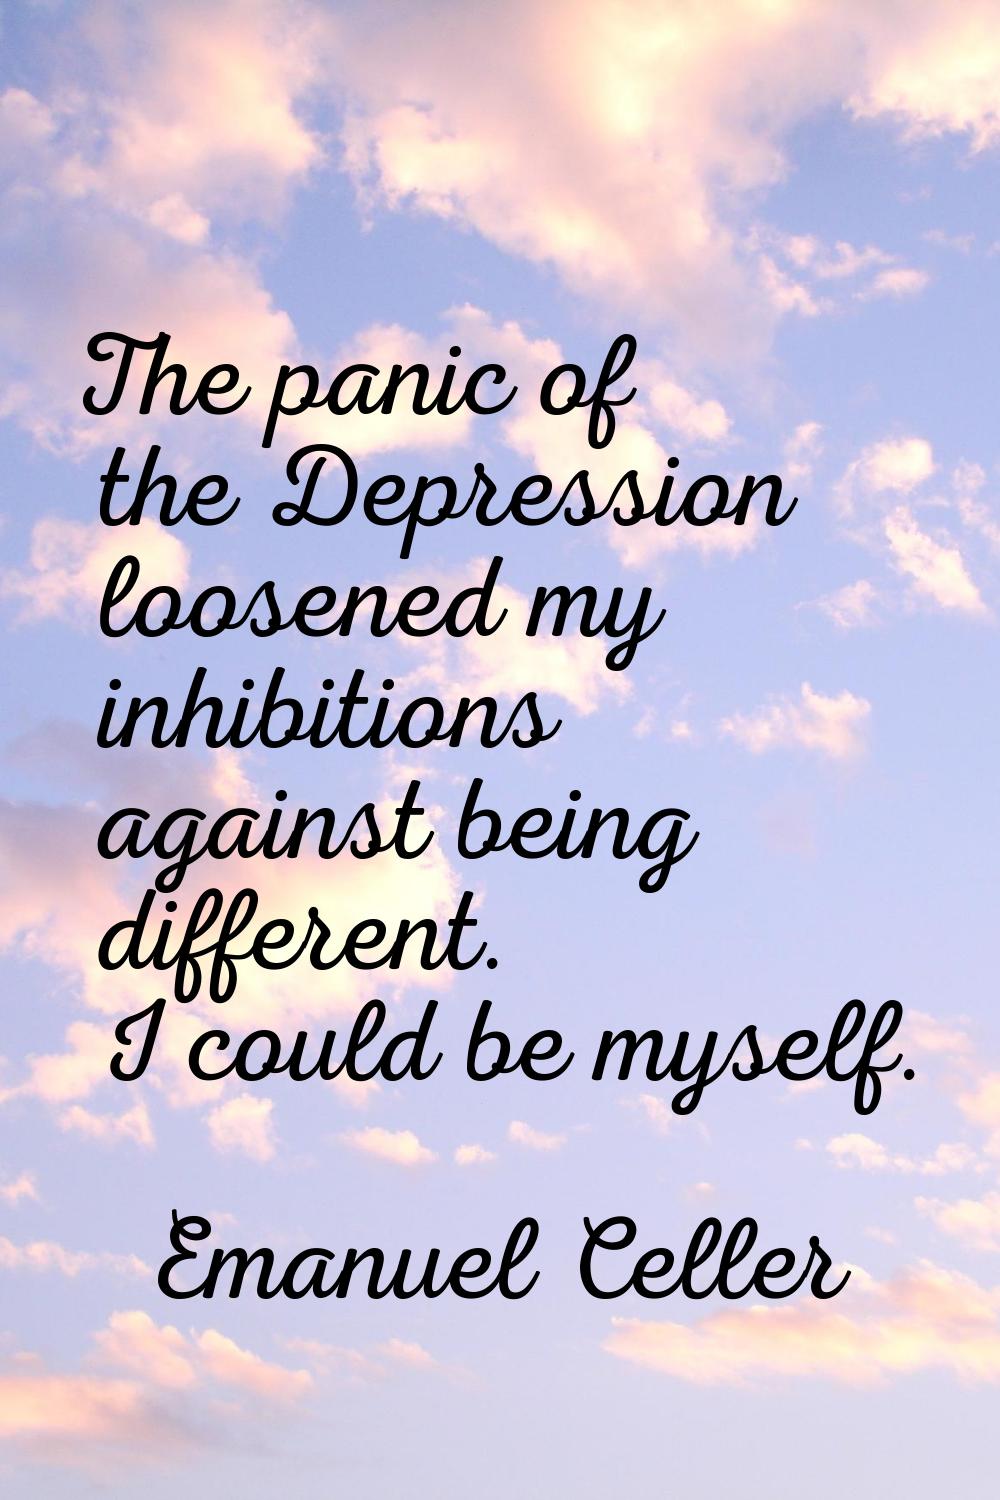 The panic of the Depression loosened my inhibitions against being different. I could be myself.